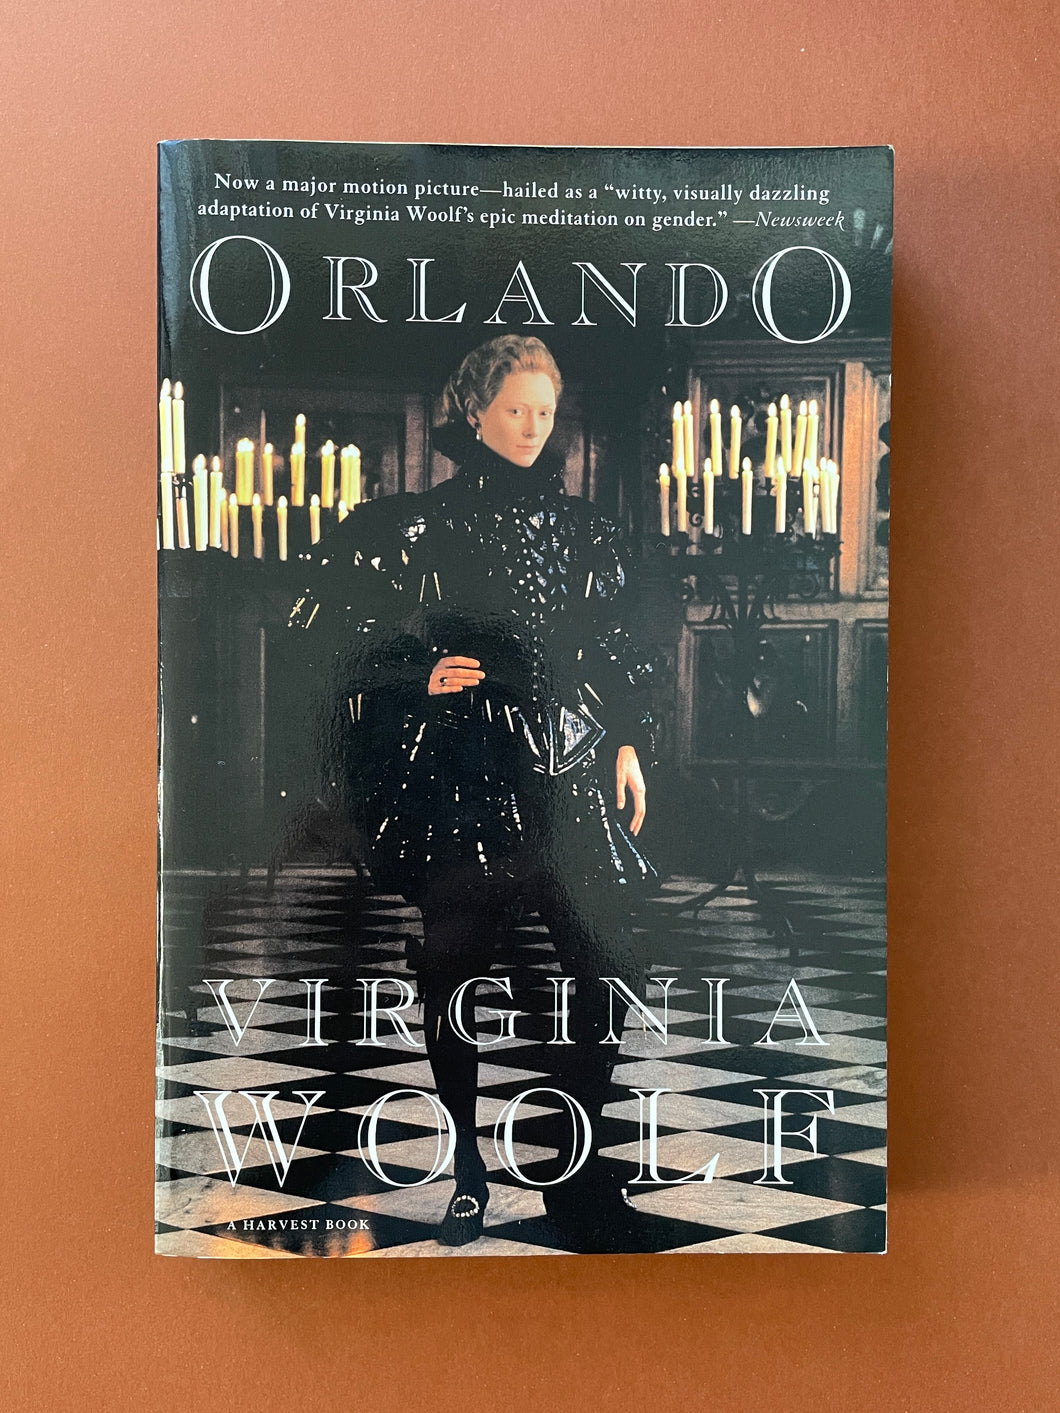 Orlando by Virginia Woolf: photo of the front cover.